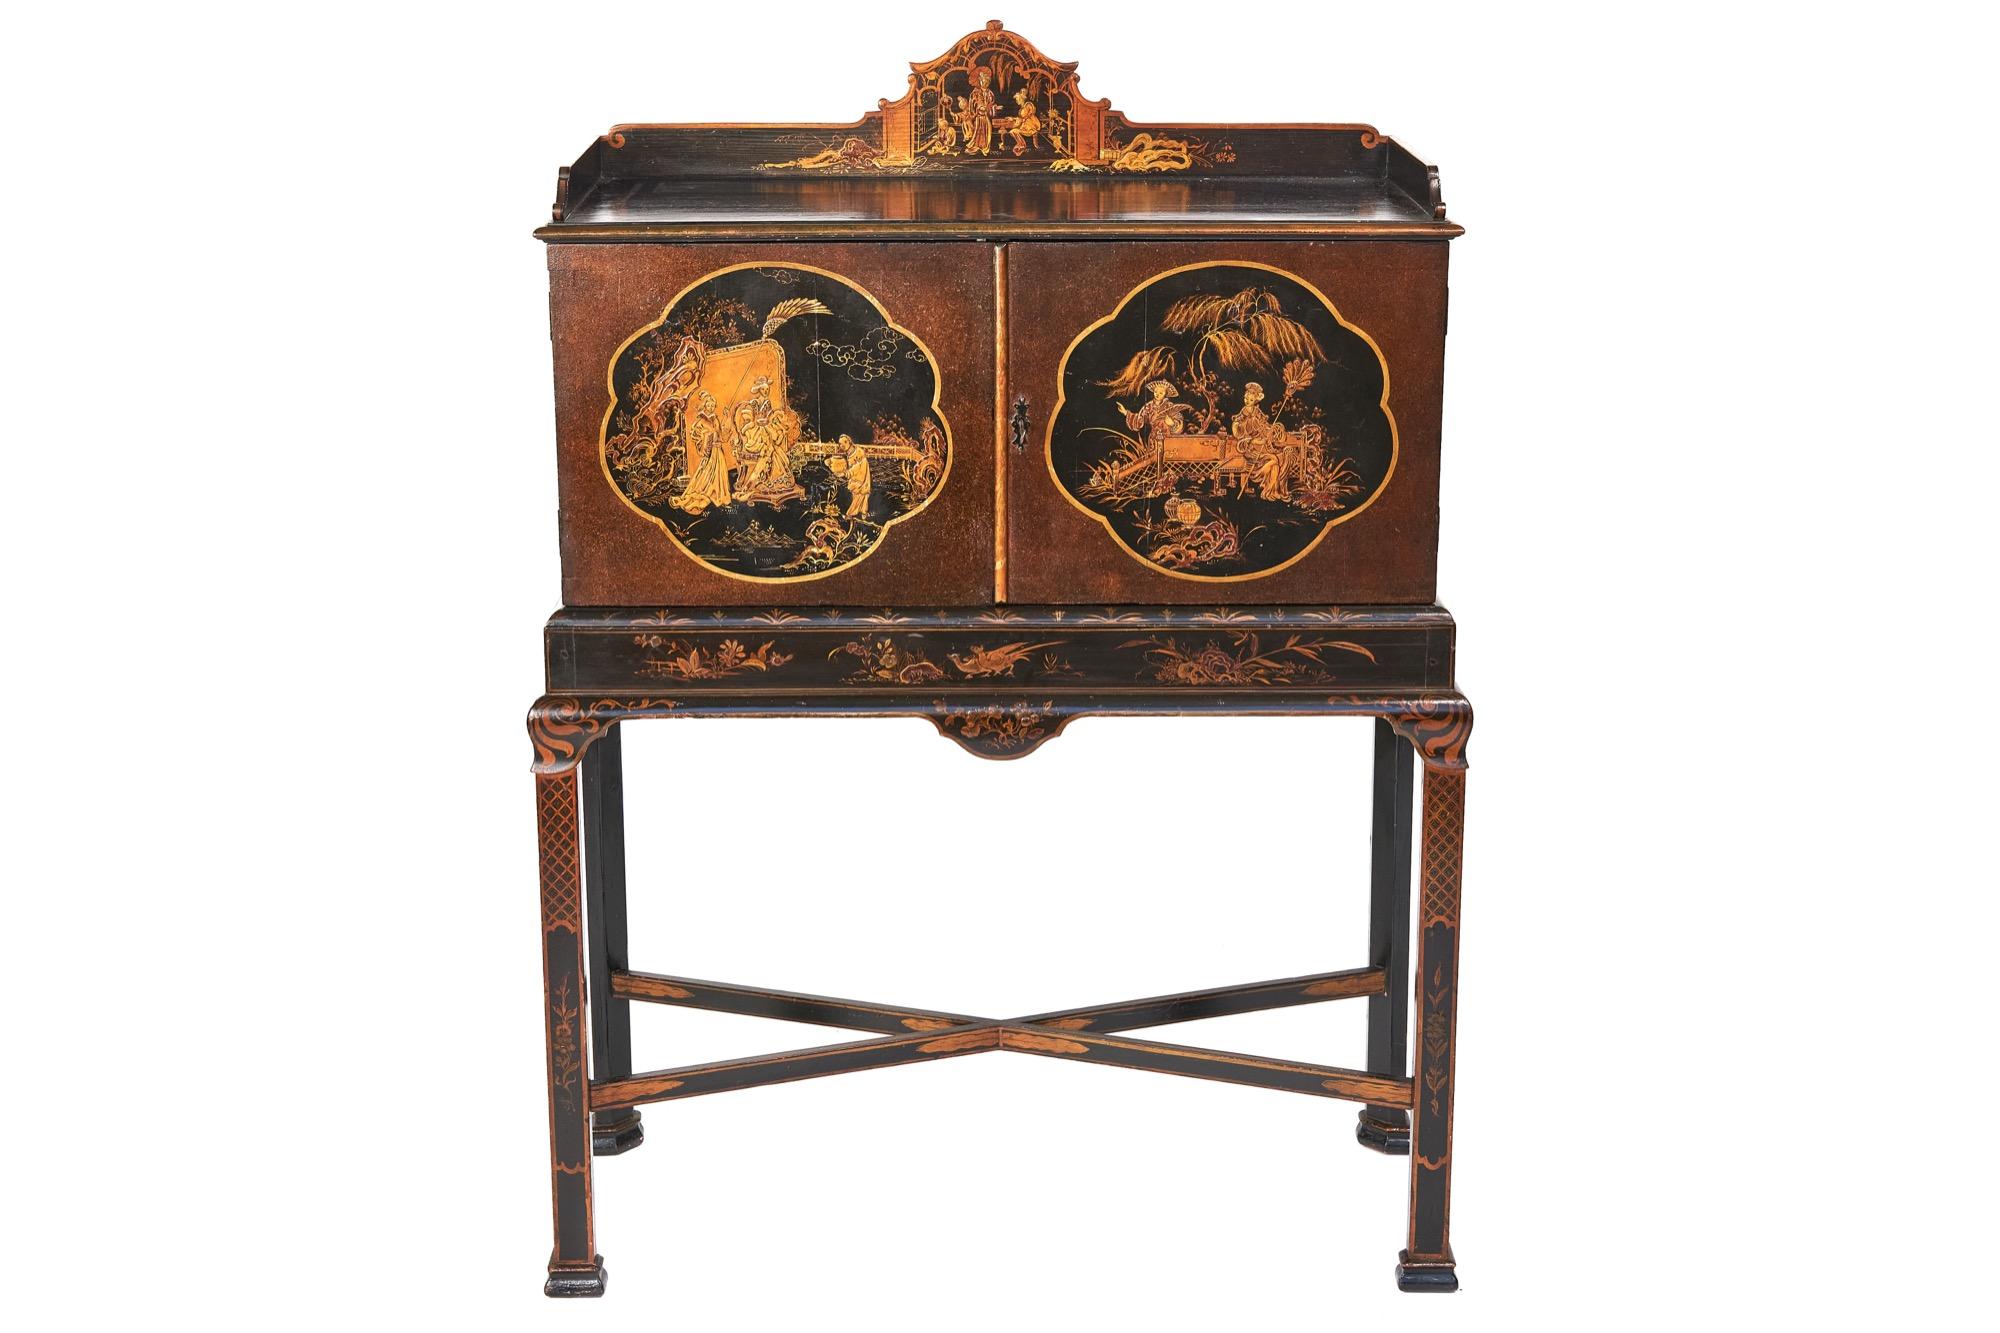 Européen Fine chinoiserie Decorated Fitted 8 Drawer Cabinet on Stand en vente